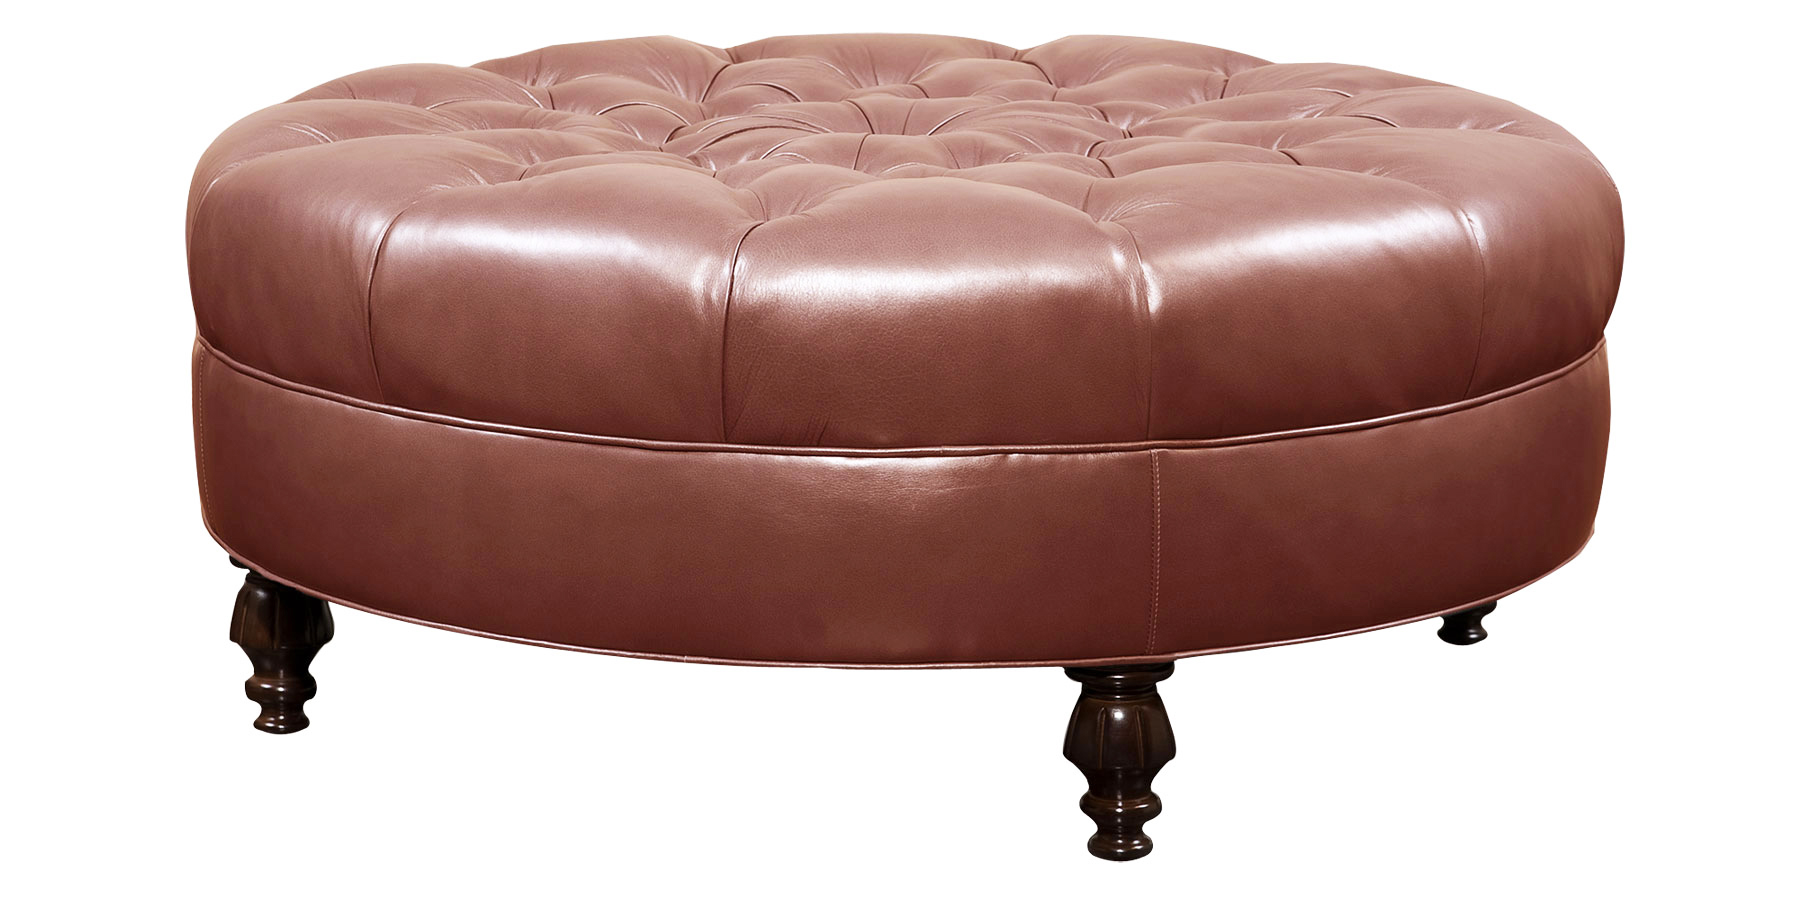 Tufted coffee table for elegance, creativity and luxury: black small round leather and fabric tufted coffee table ottoman for living room